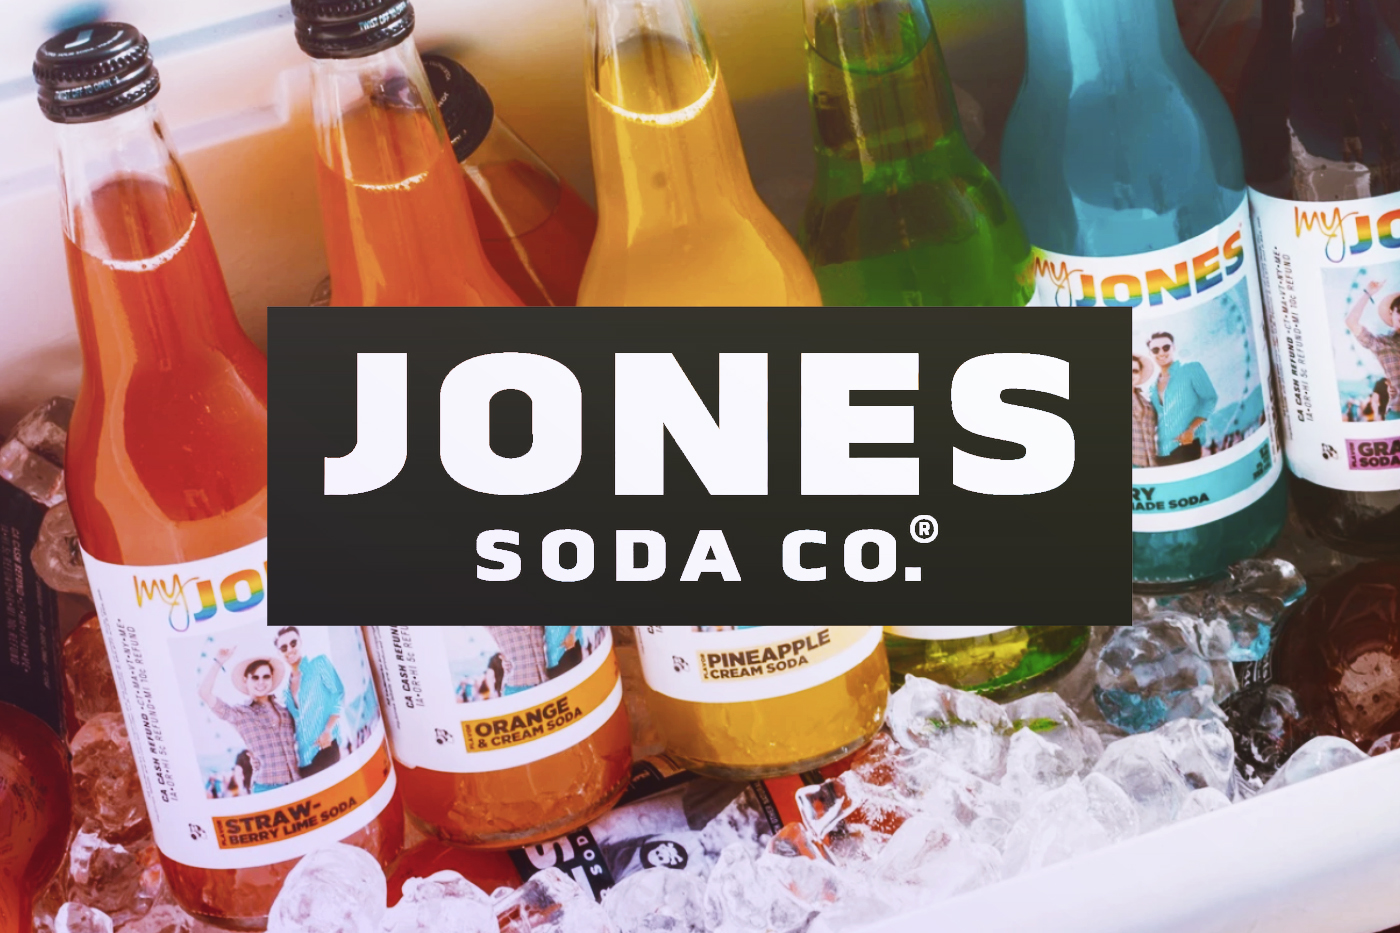 Jones Soda Co. Signals Transformation With Planned Strategic Entry